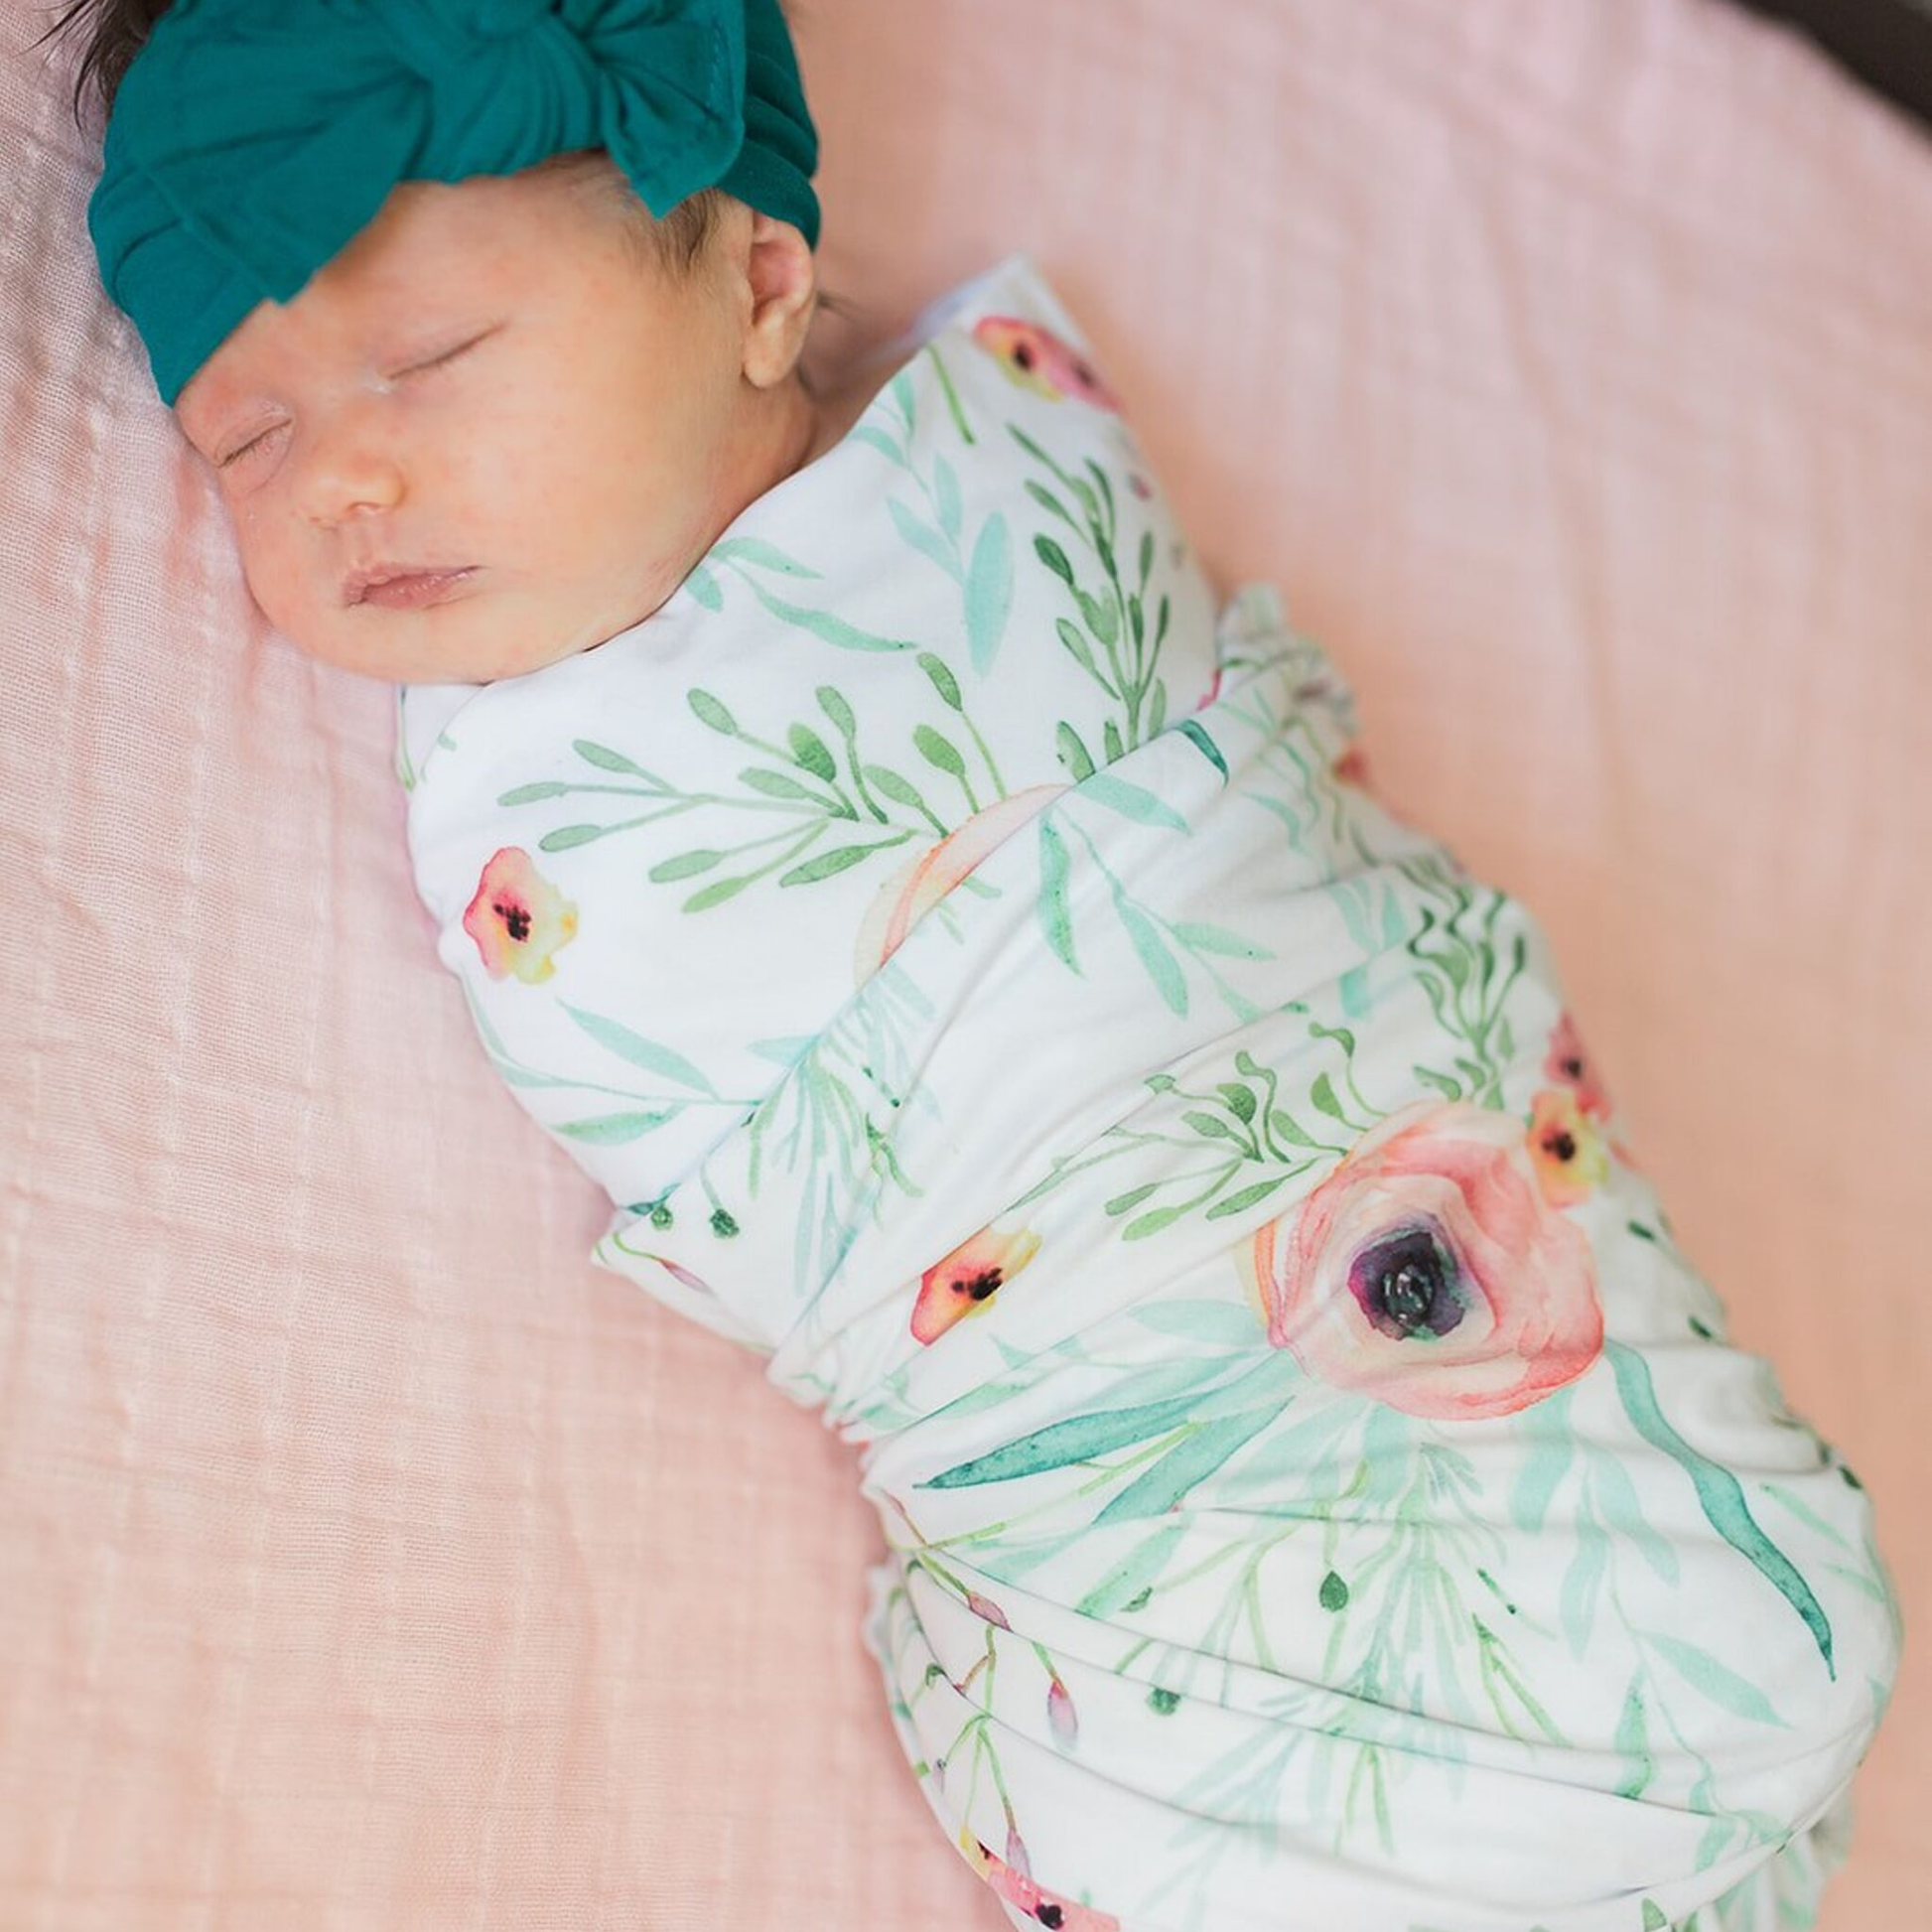 floral watercolor baby swaddle, baby girl swaddle blanket, knit swaddle blanket, new baby girl gift